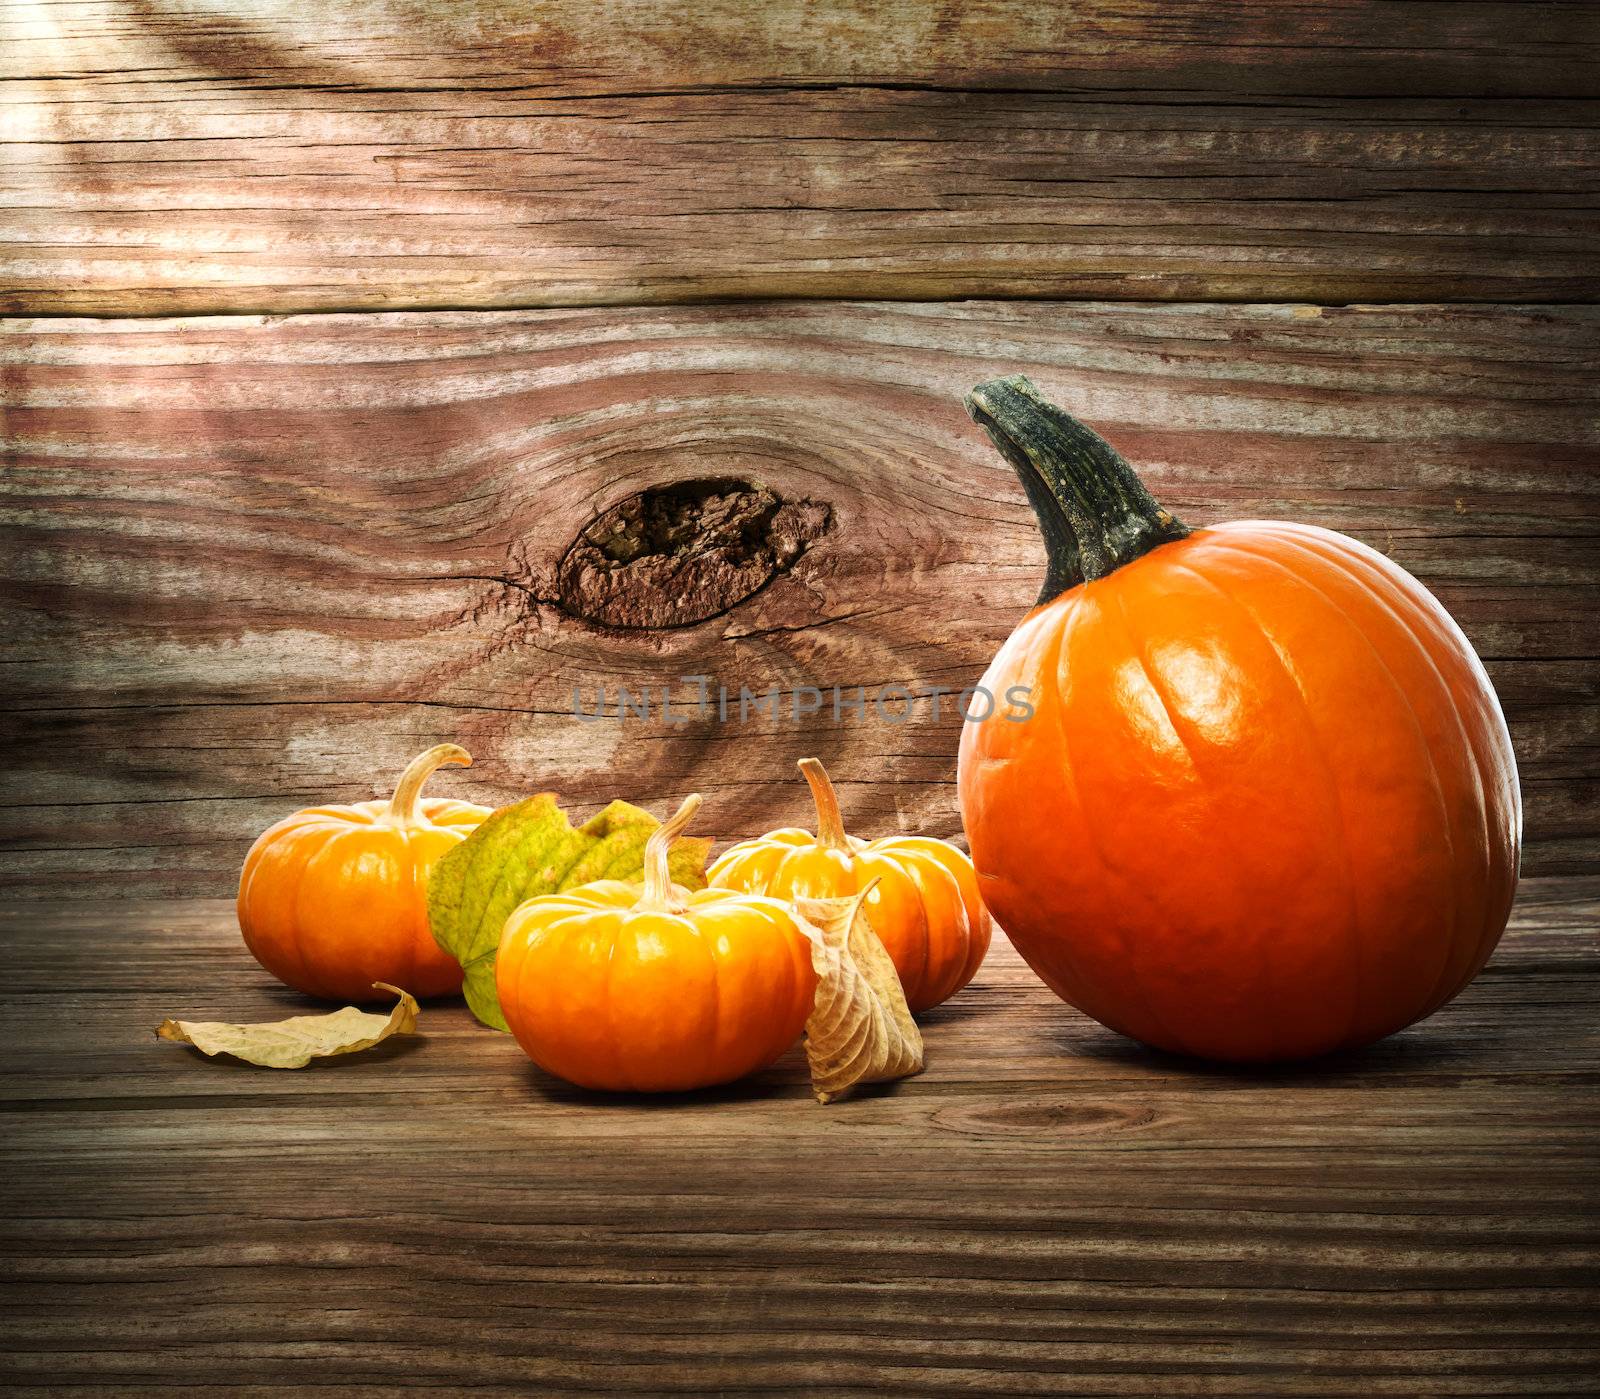 Pumpkins and squashes on rustic wooden boards with autumn leaves